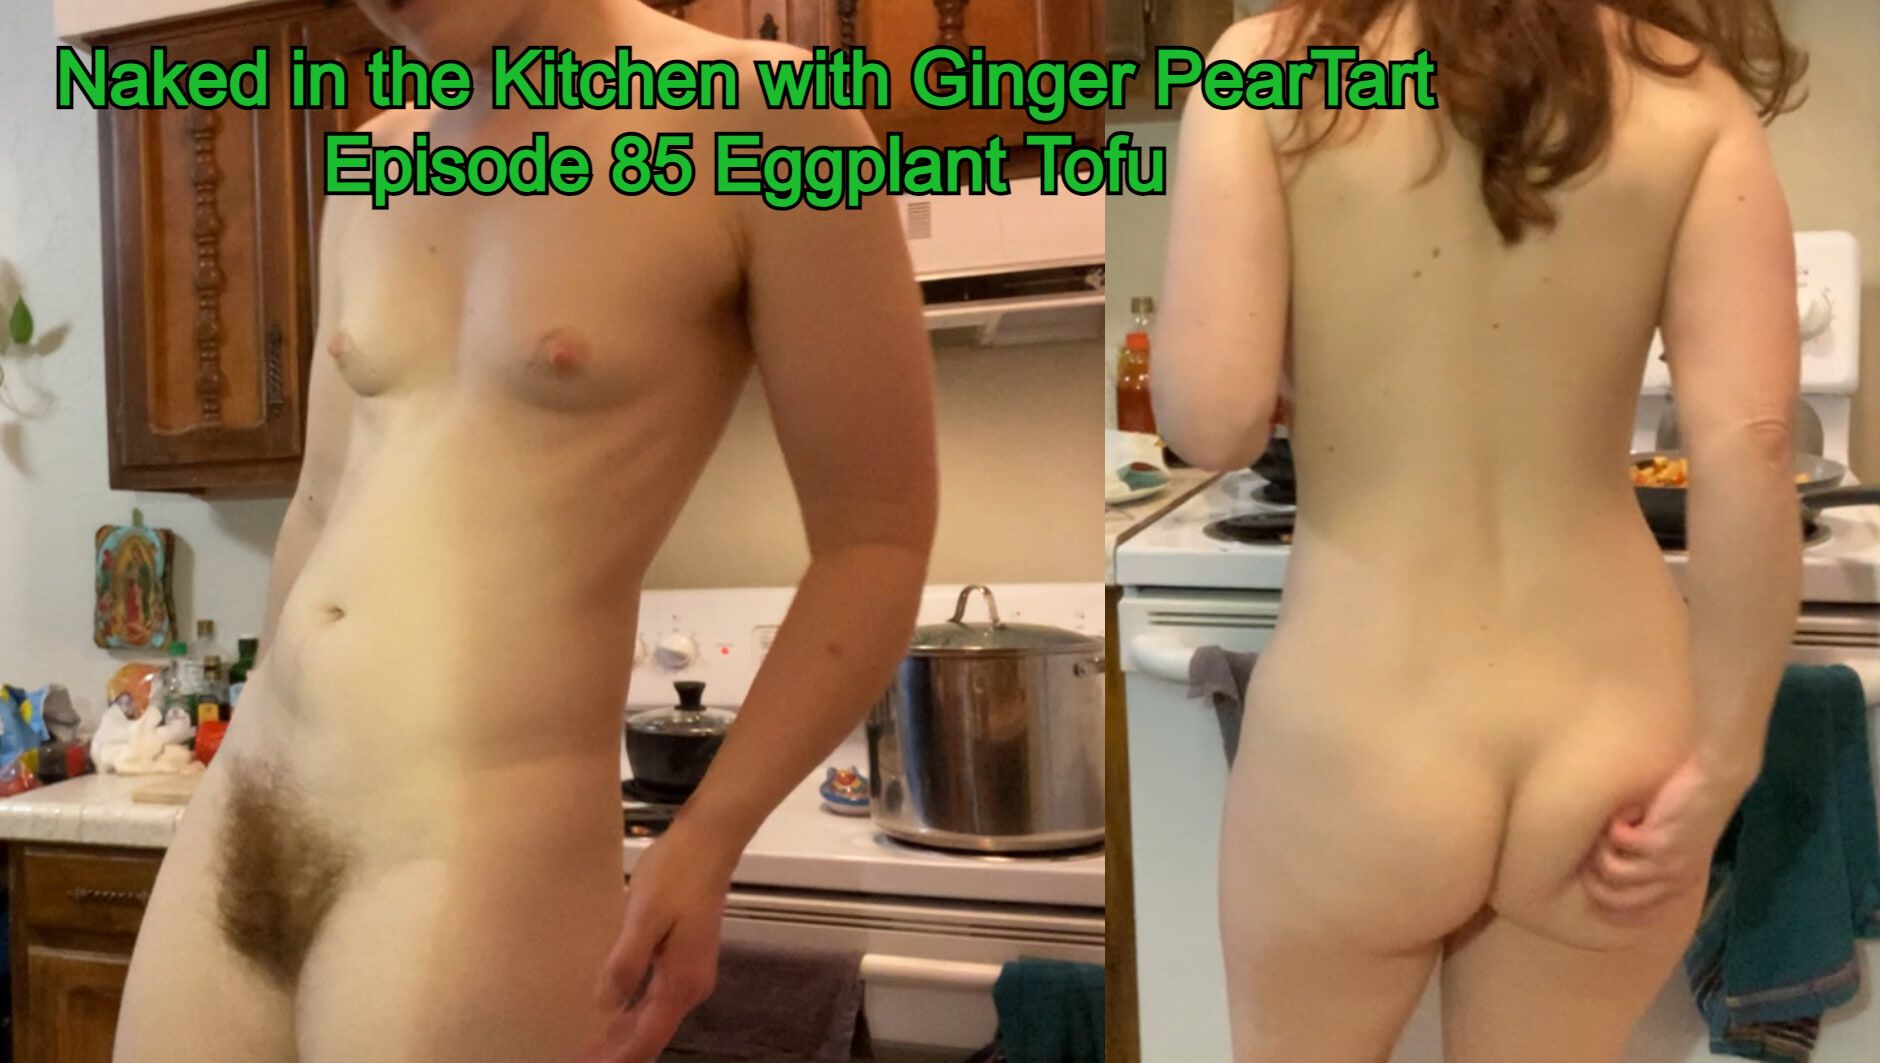 Episode 85 Naked in the Kitchen Screenshots #40